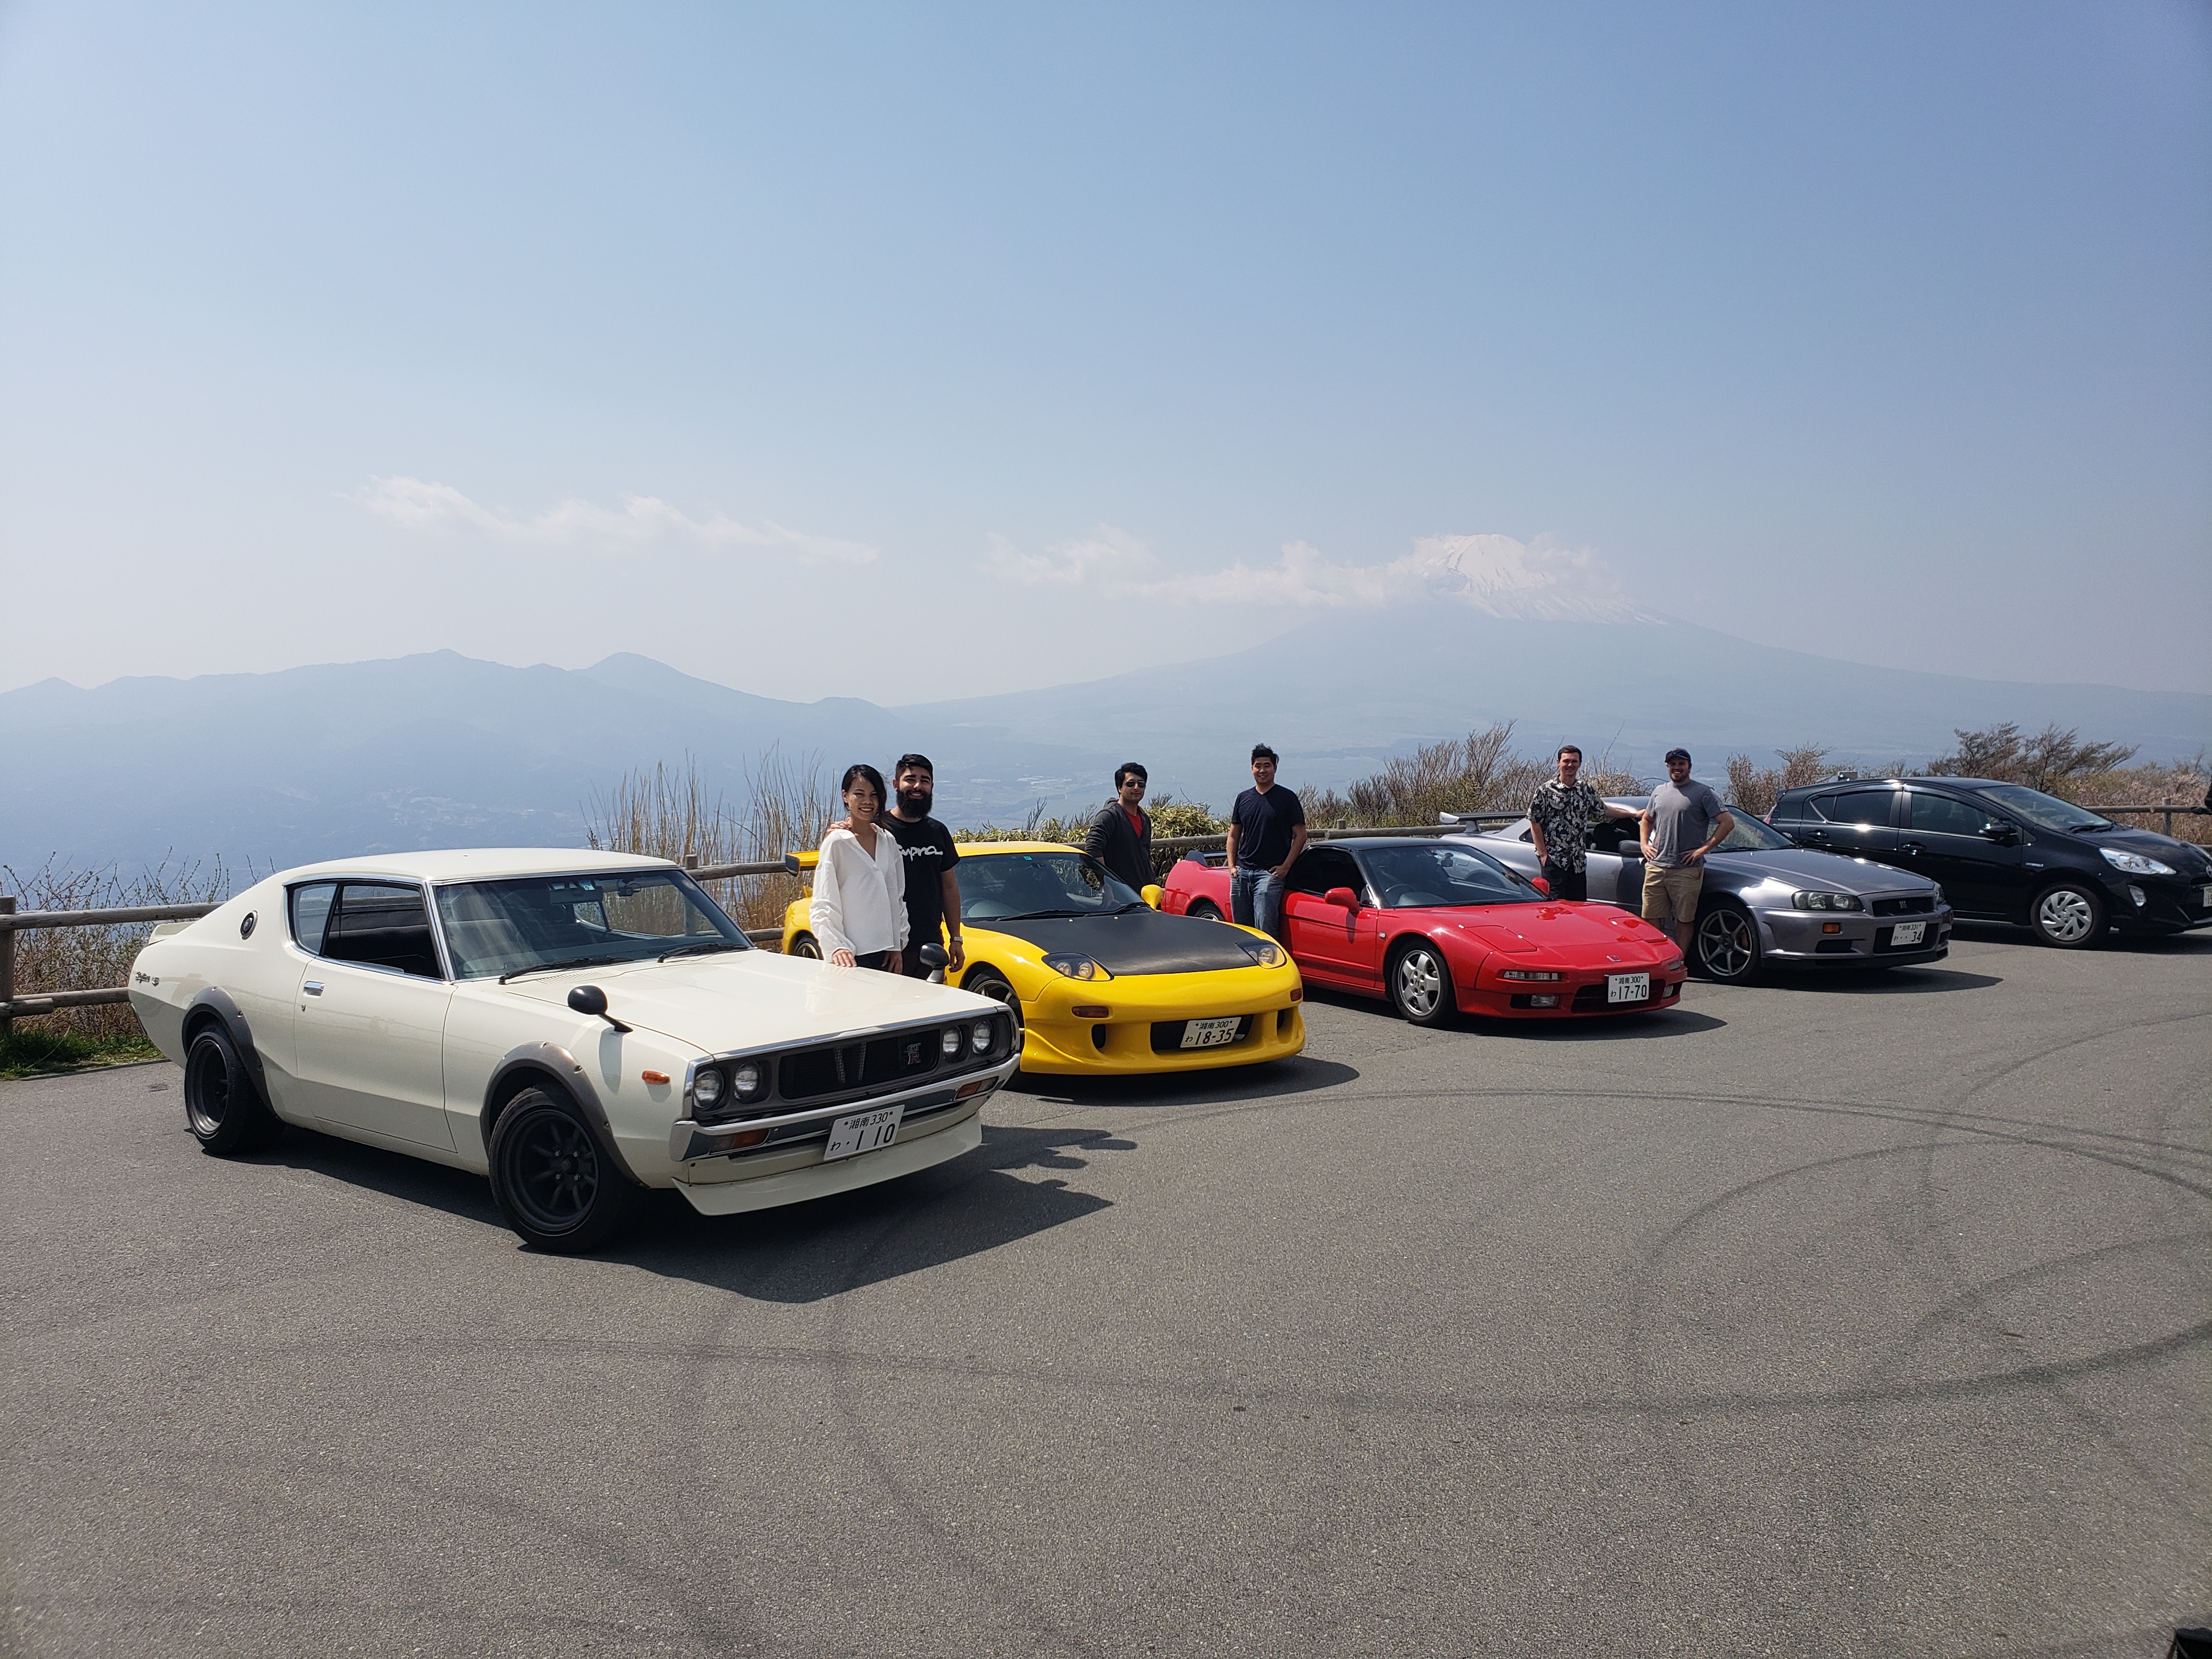 Nissan Skyline, Driving a Nissan Skyline with Mount Fuji in the rearview mirror, ClassicCars.com Journal